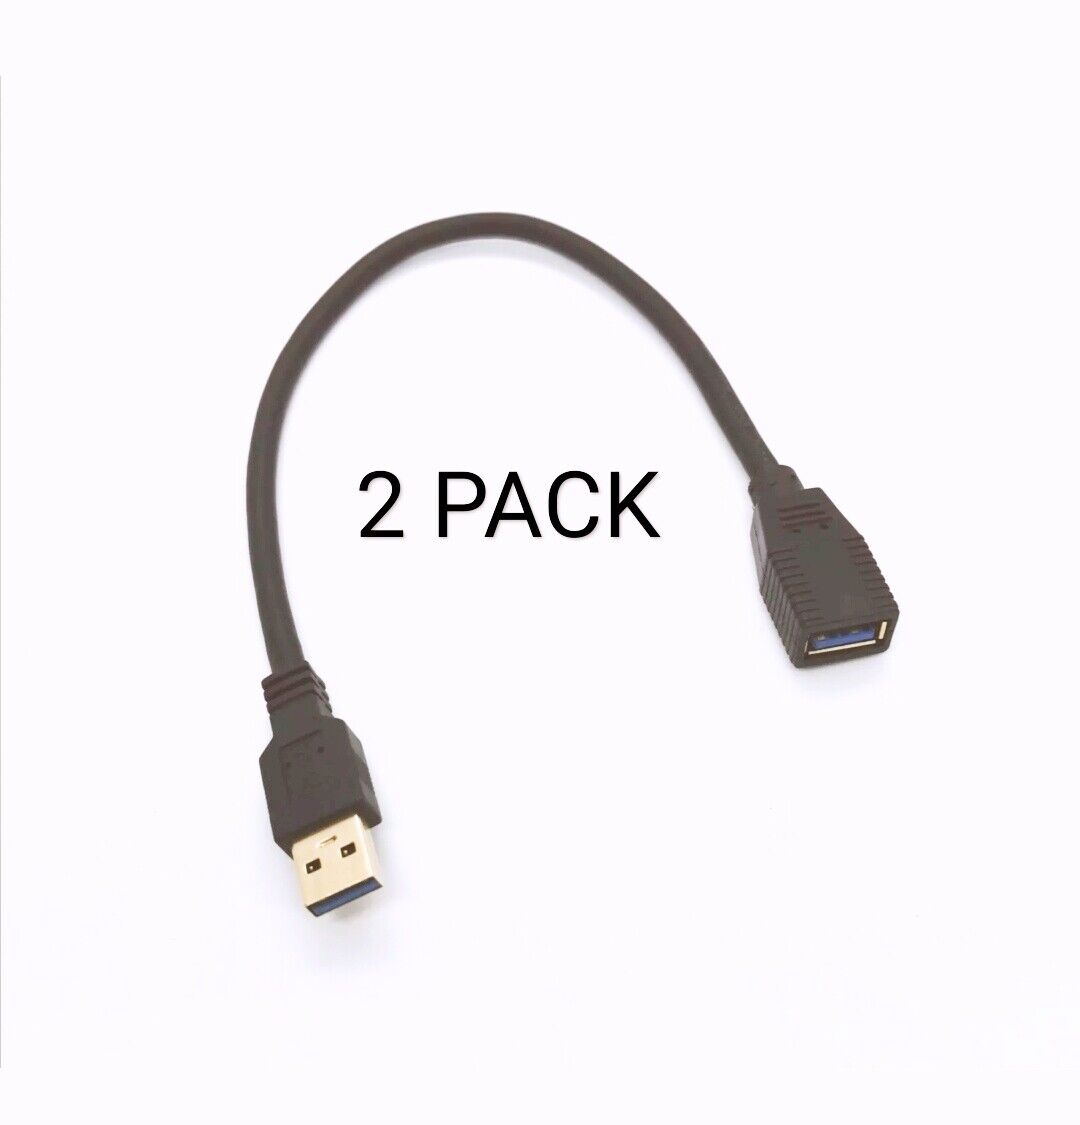 2PACK 1Ft USB 3.0 Extension Cable Gold Plate Type A Male to Female Black Color